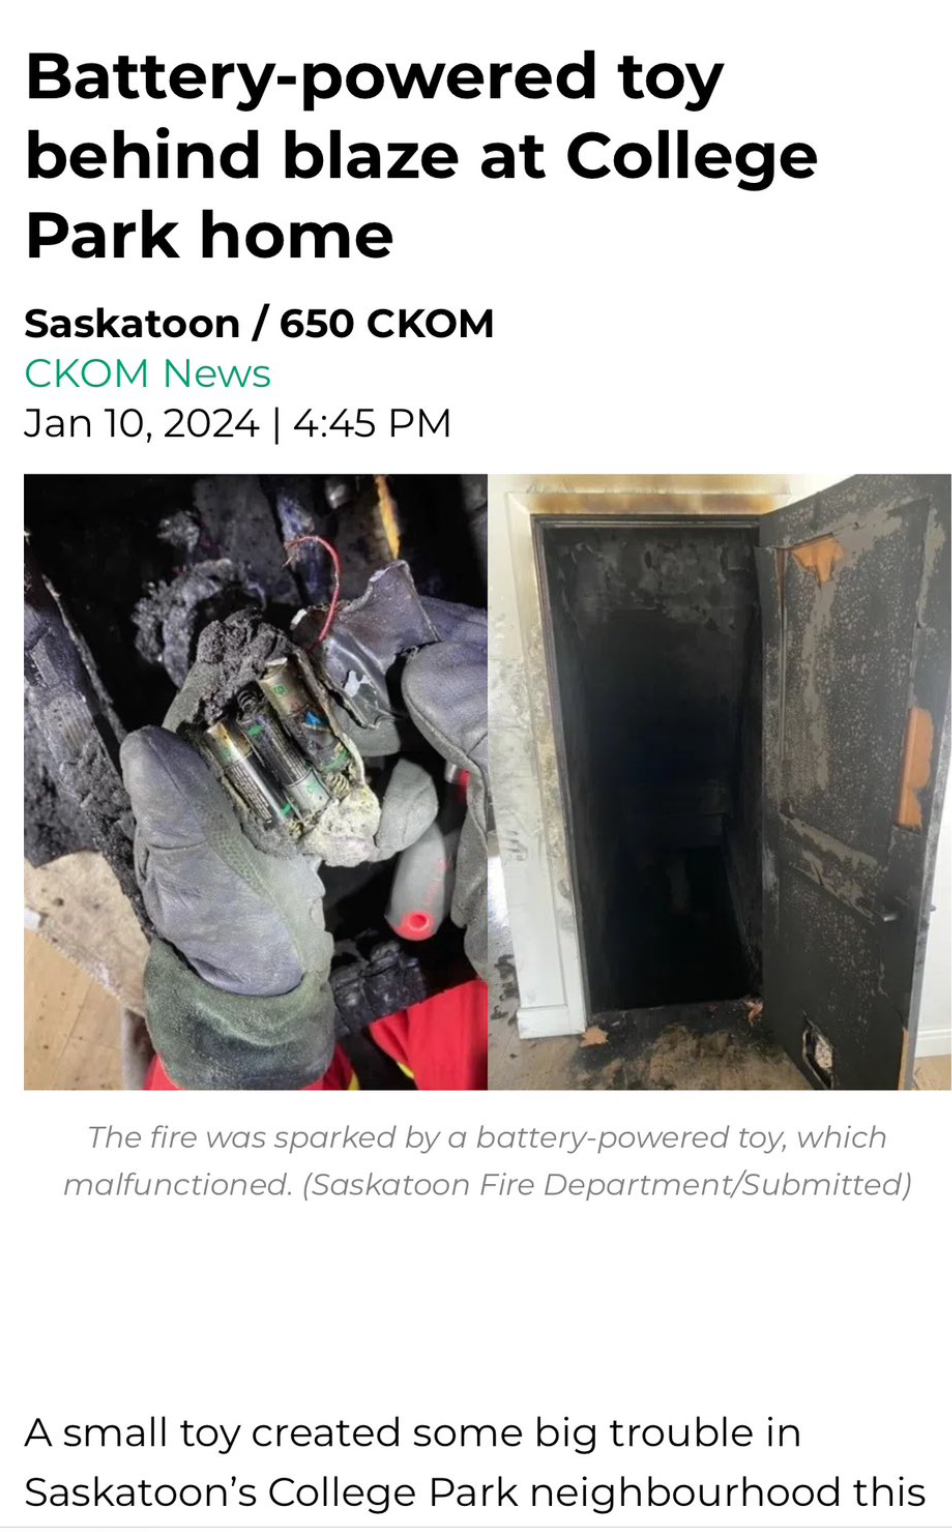 Headline from an article reading Battery powered toy behind blaze at College park home showing a battery pack from a toy and a charred up bedroom door.